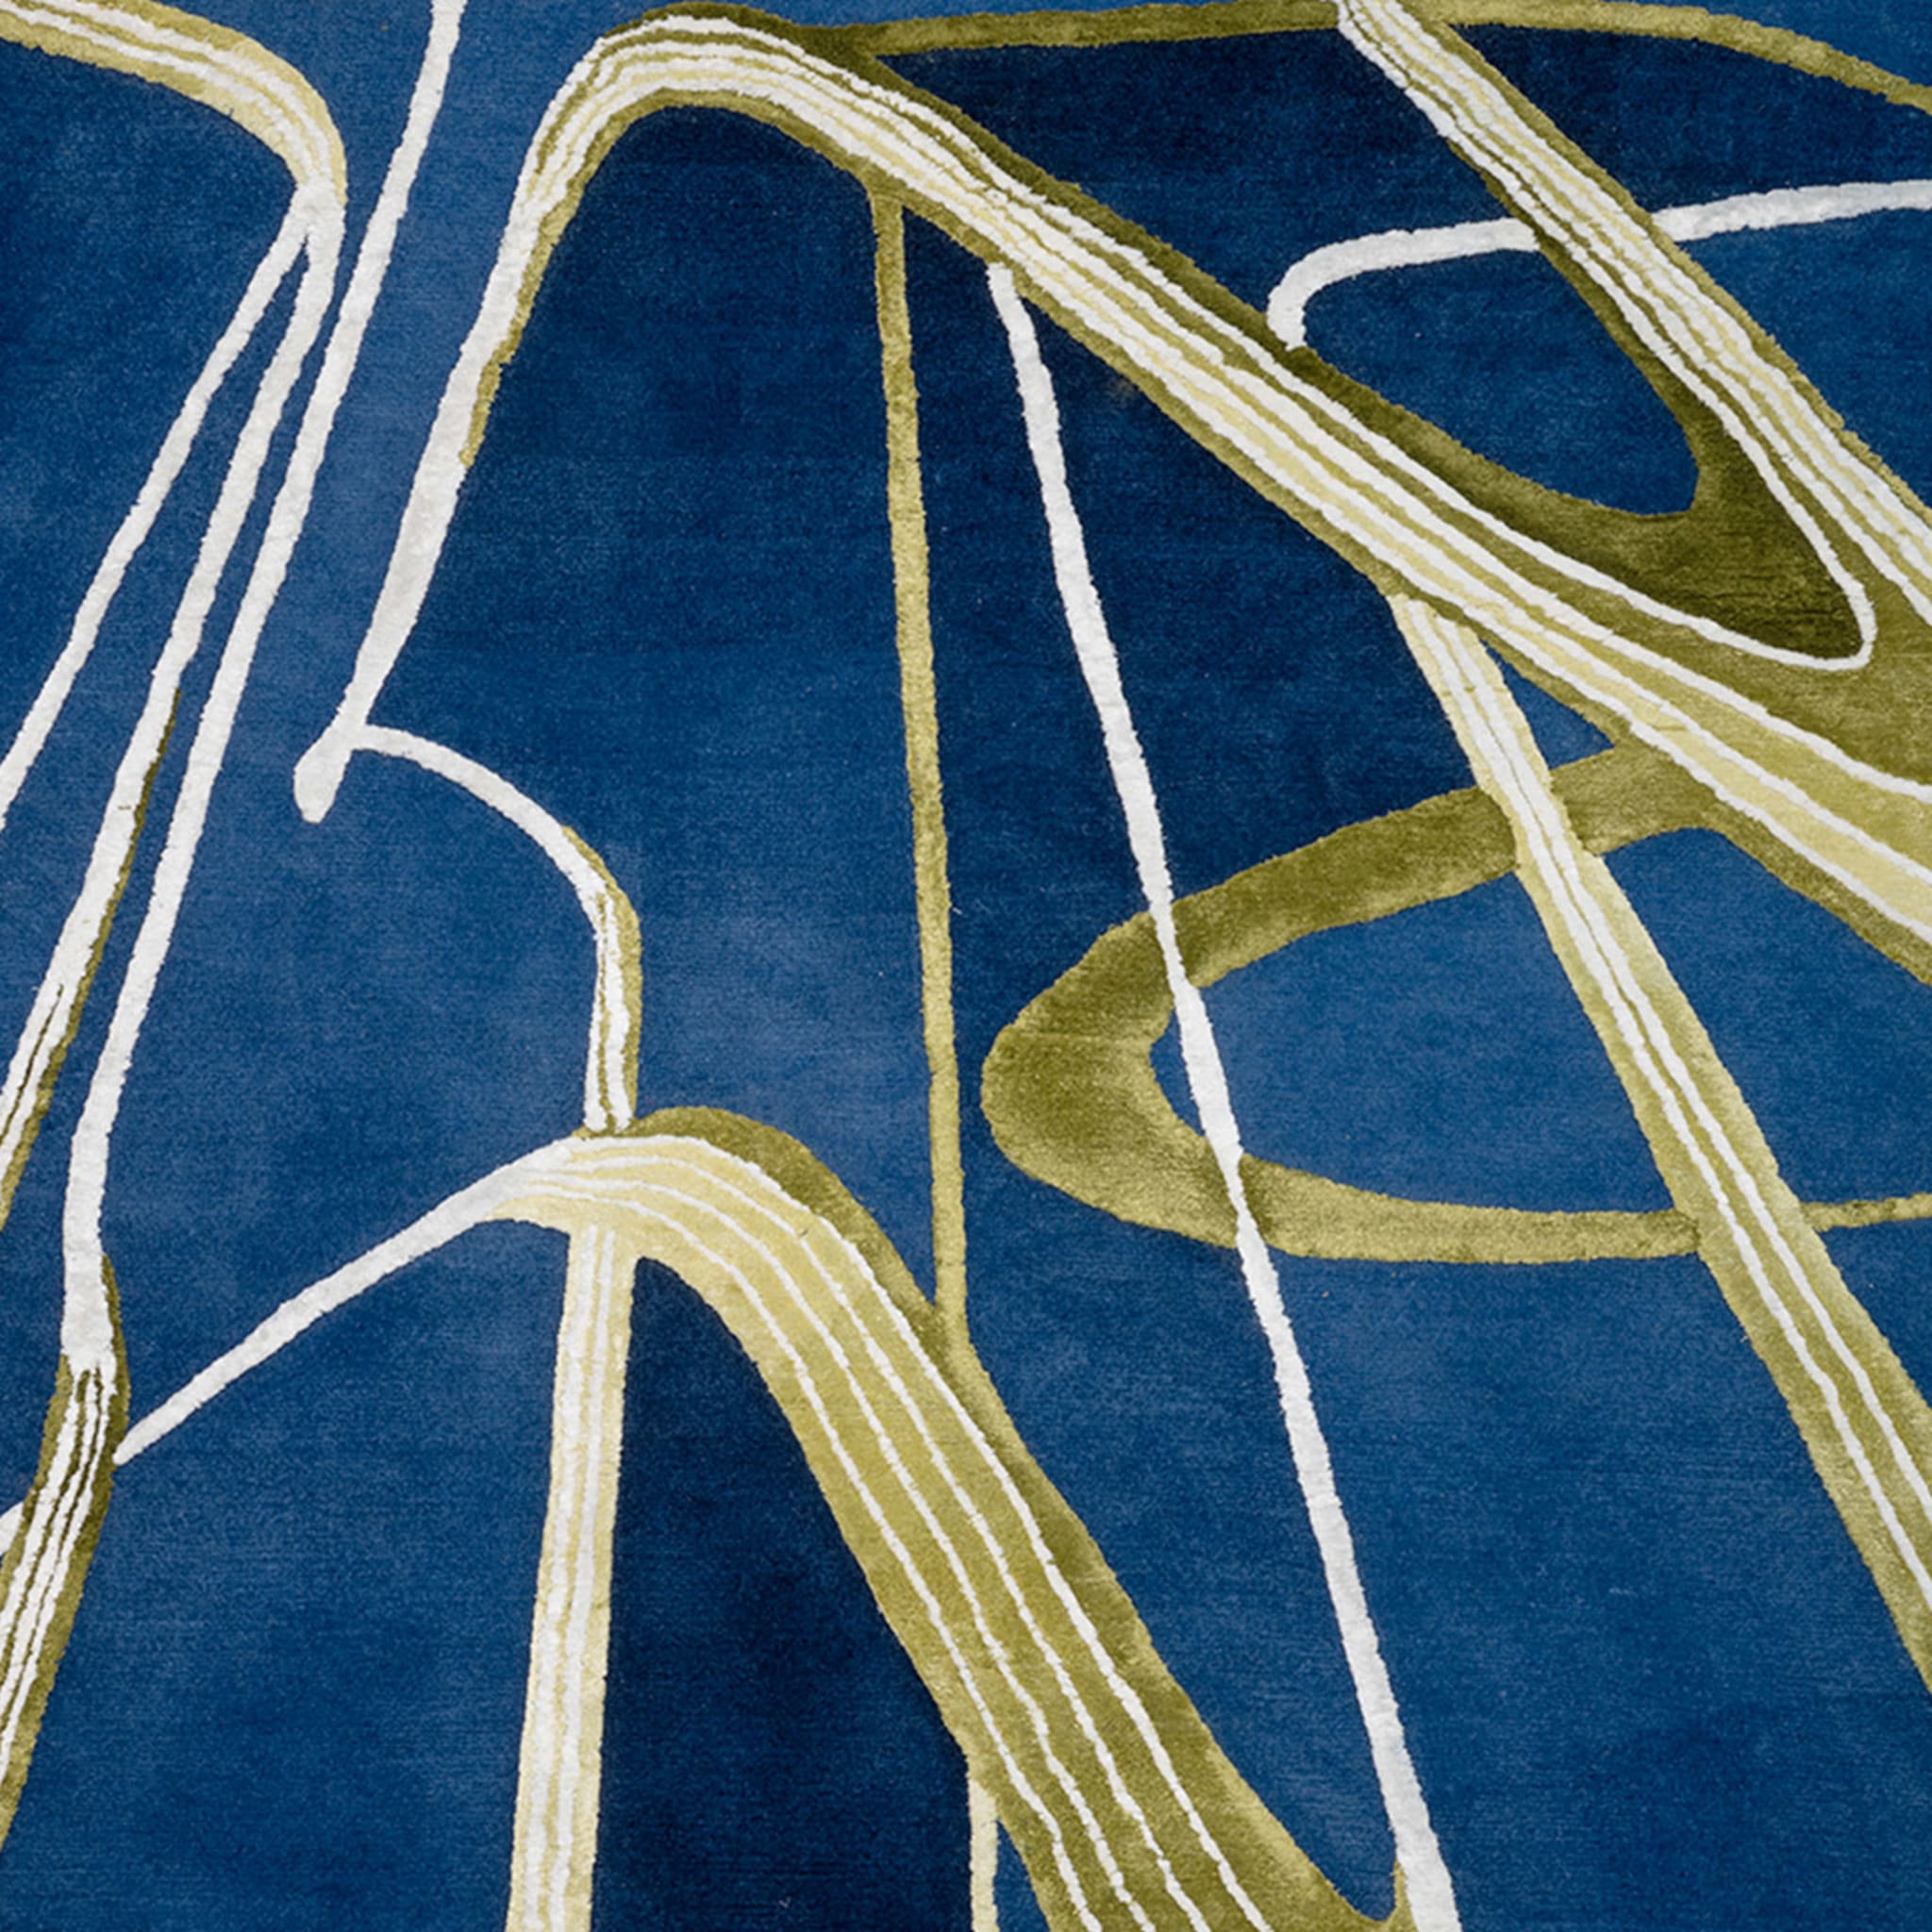 Perspective 02 Ver. A Rug By Zaha Hadid Architects - Alternative view 2